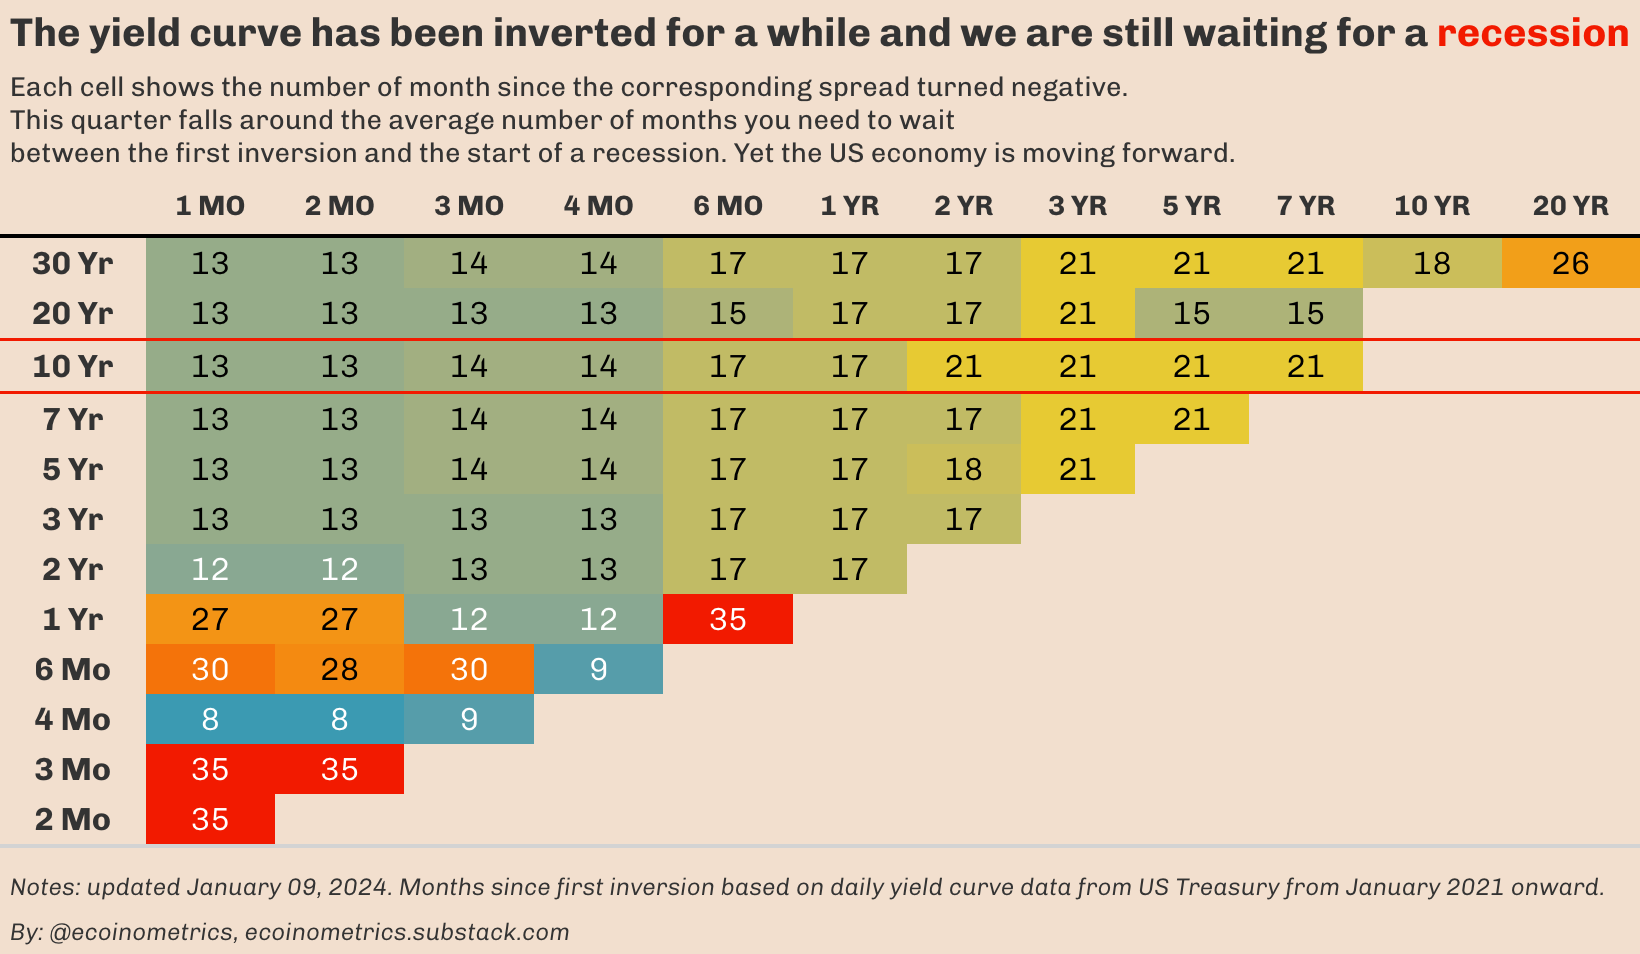 Table of months since the inversion of the yield curve for all spreads.